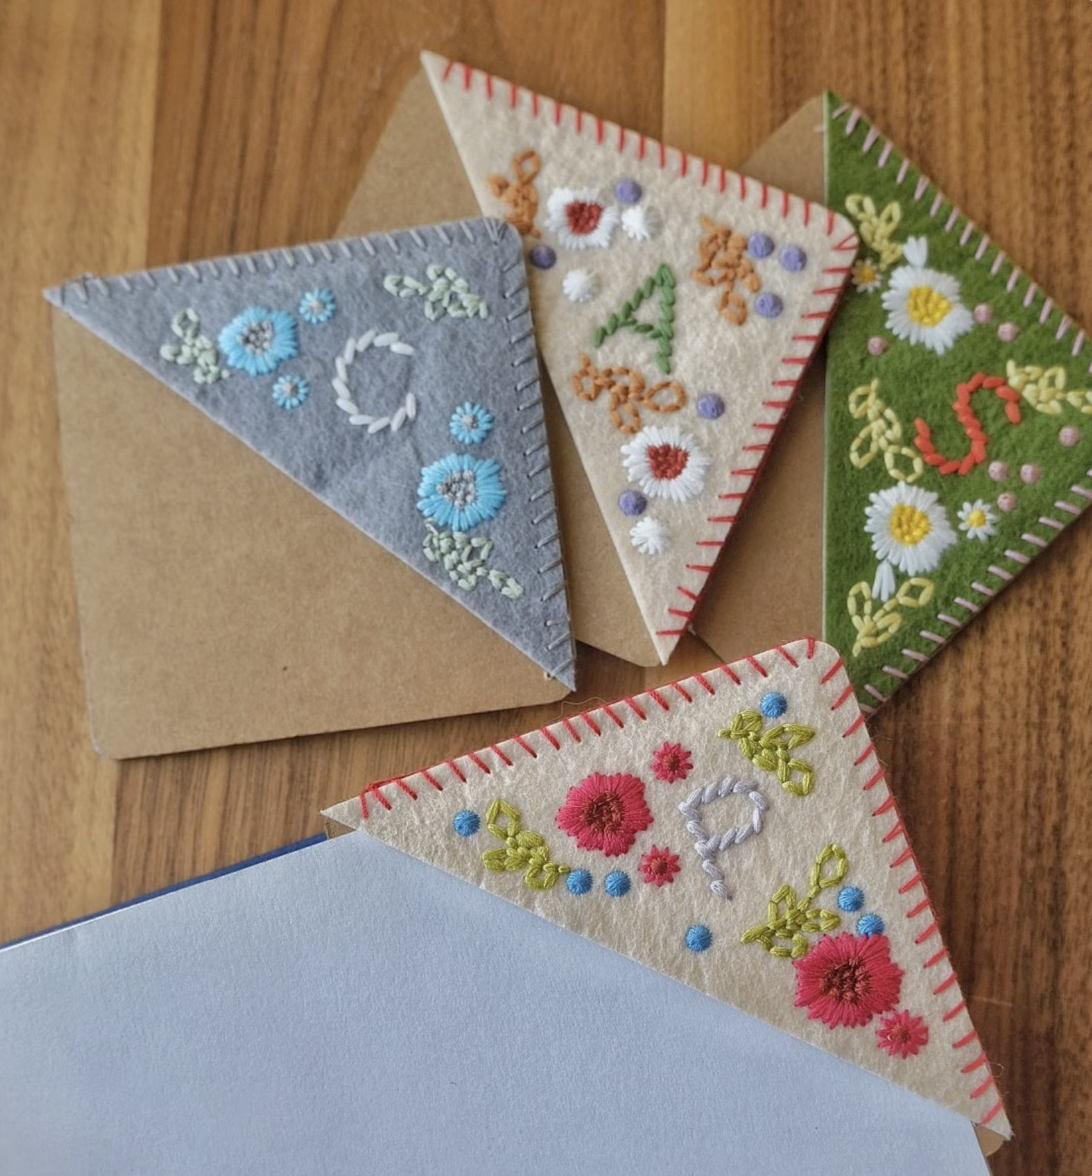 Four felt corner bookmarks embroidered with floral designs and initials